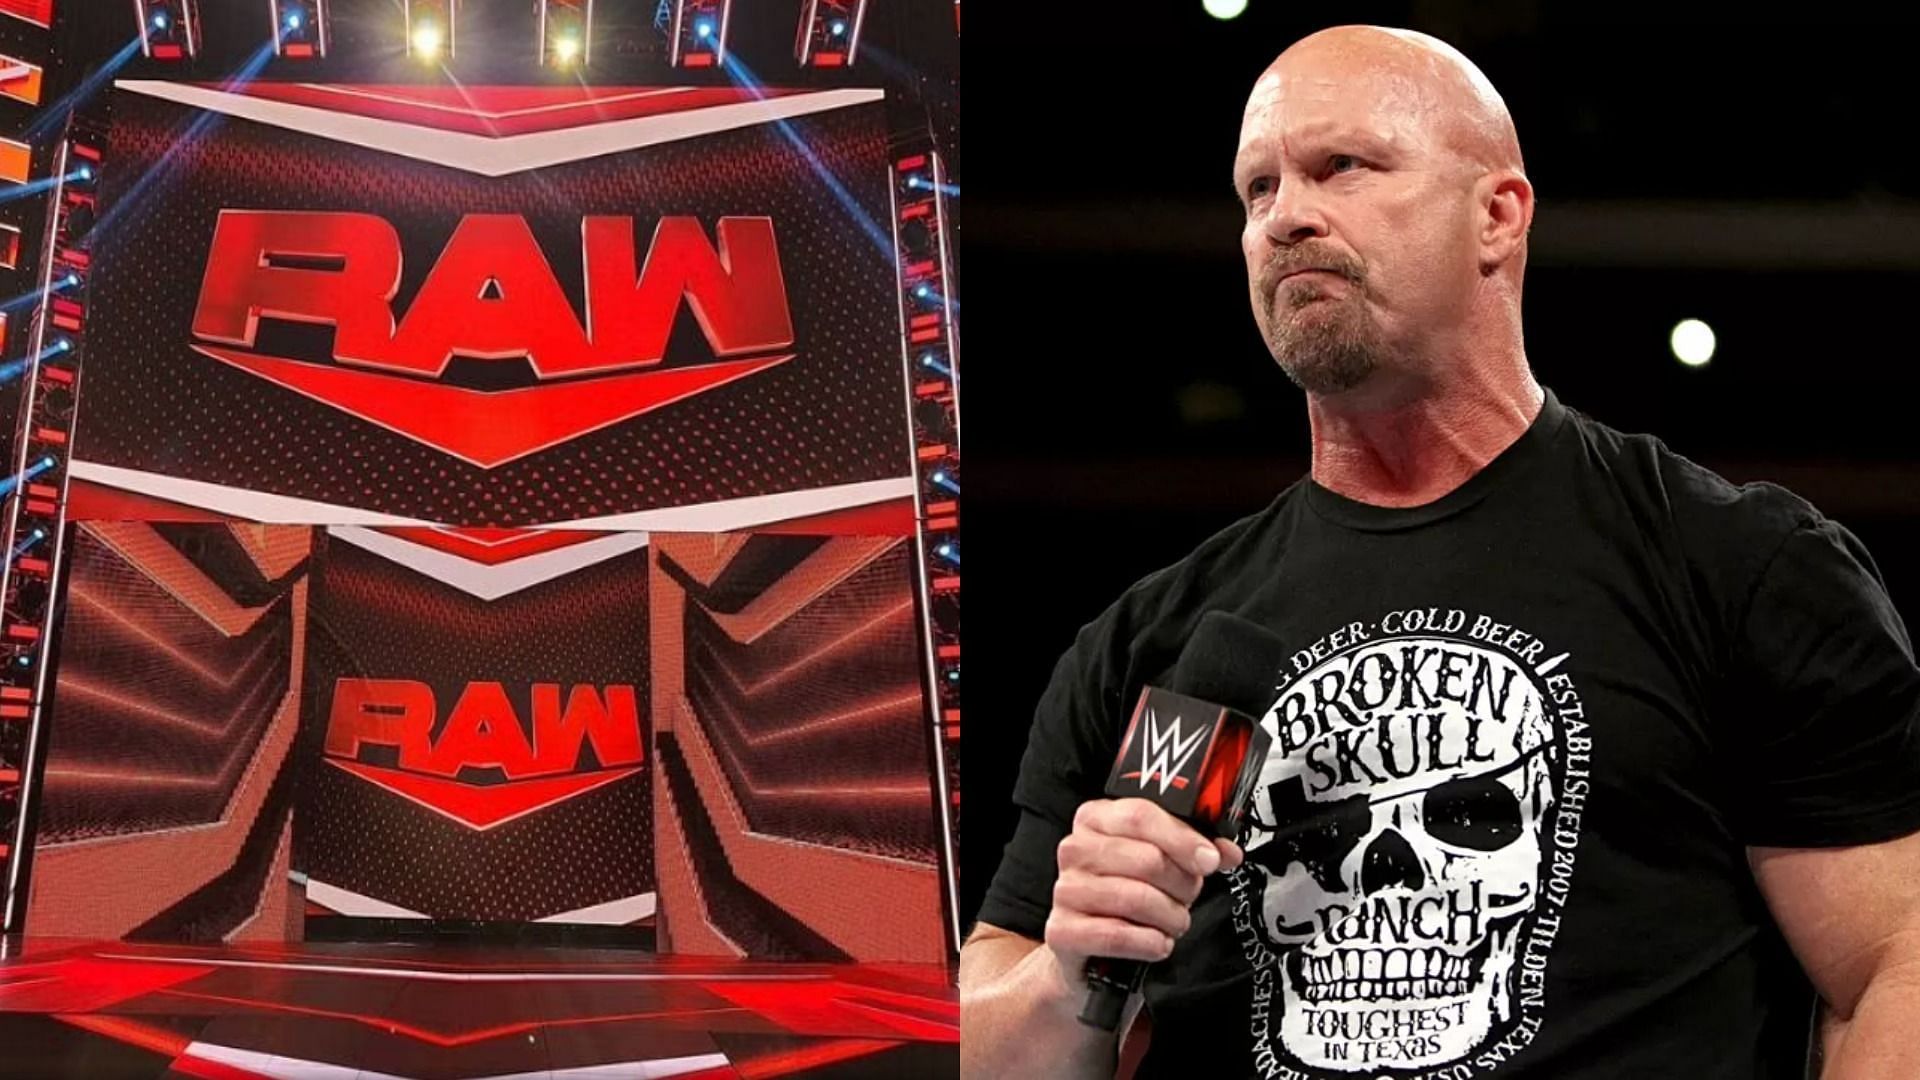 Monday Night RAW Stage (left); Stone Cold Steve Austin (right)